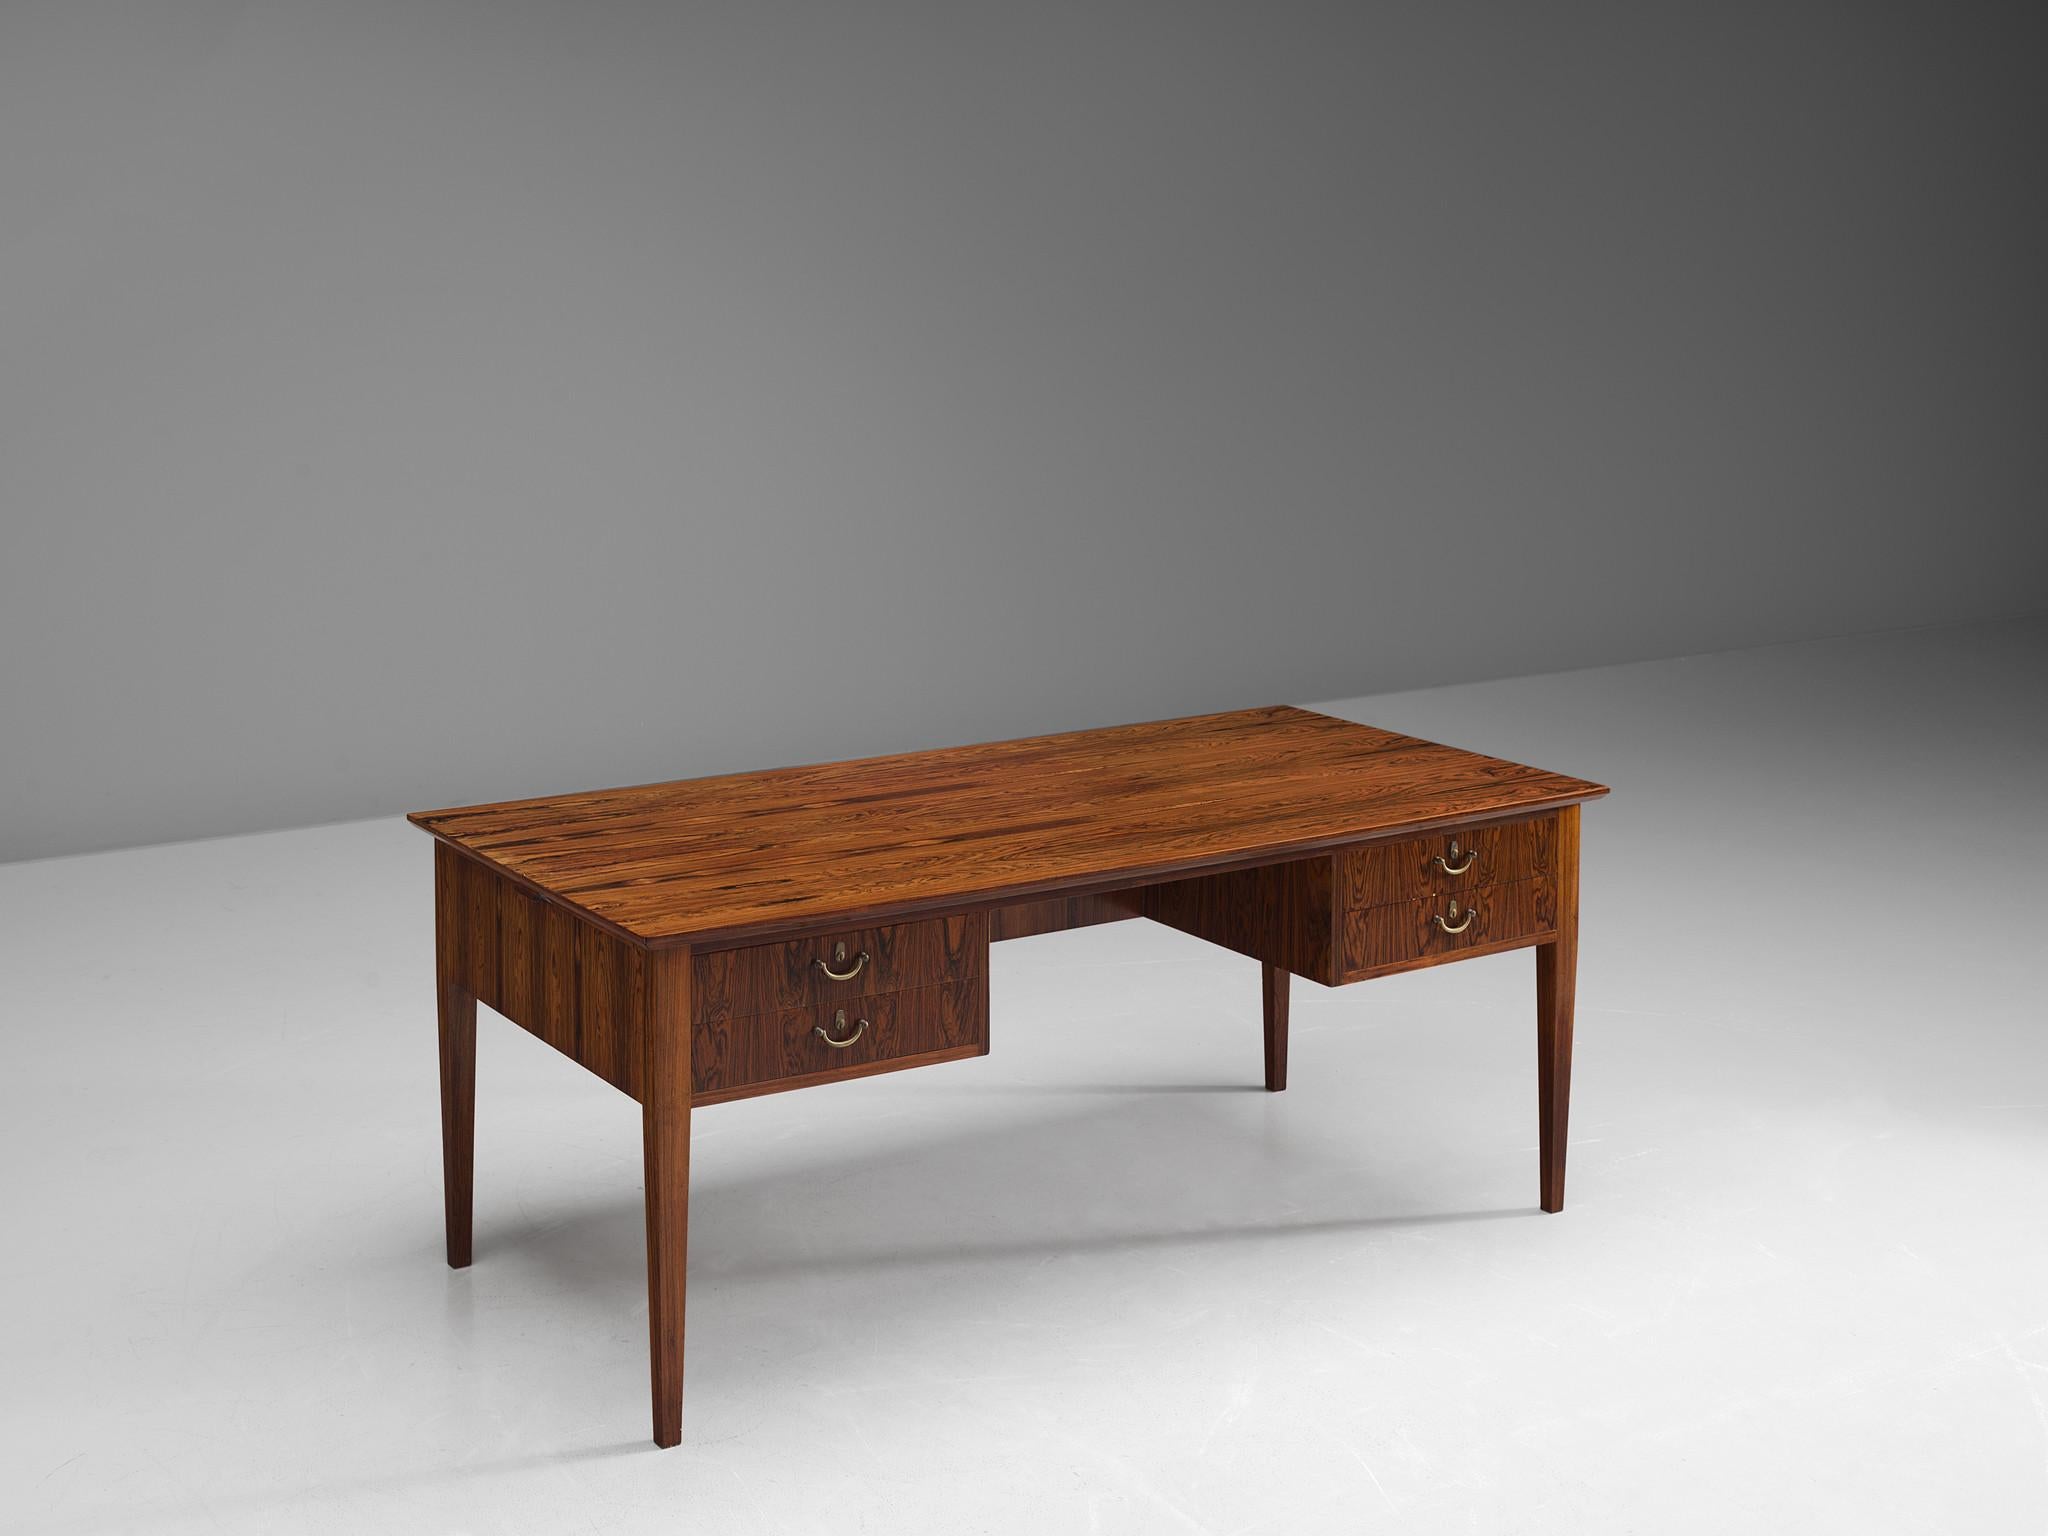 Desk, brass and rosewood, Denmark, 1950s.

This desk and writing table is executed in rosewood. It shows an extraordinary wood grain, which emphasizes the otherwise modest design of this piece. The design is sincere and class, and shows great eye